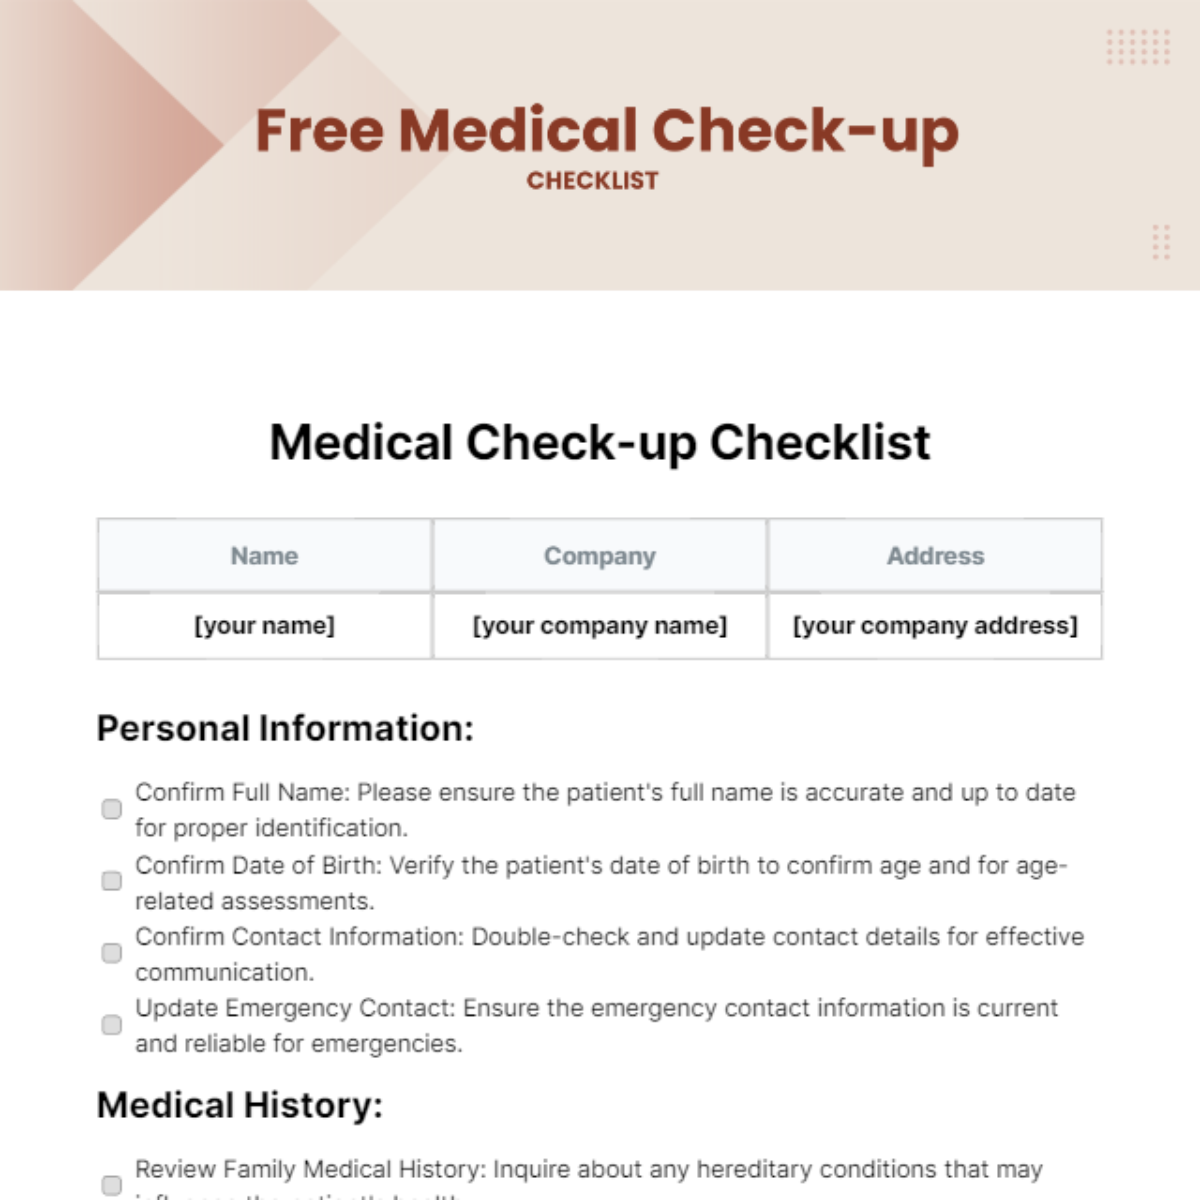 Medical Check-up Checklist Template